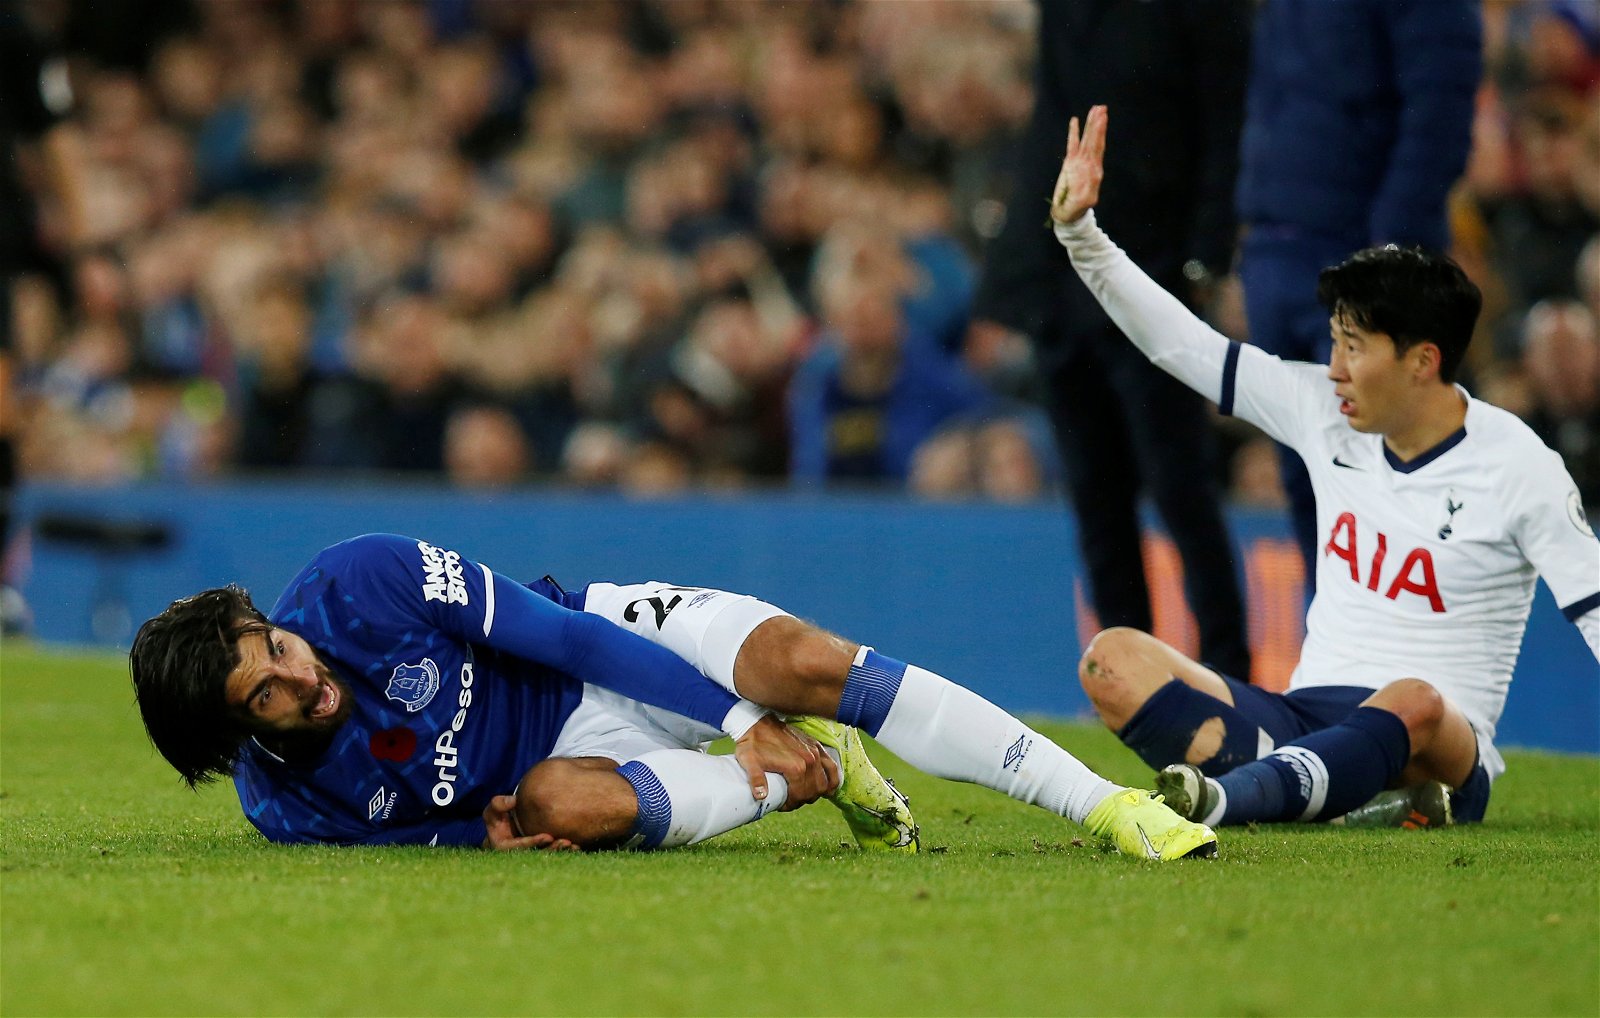 Everton's Andre Gomes suffered ankle fracture dislocation against Tottenham